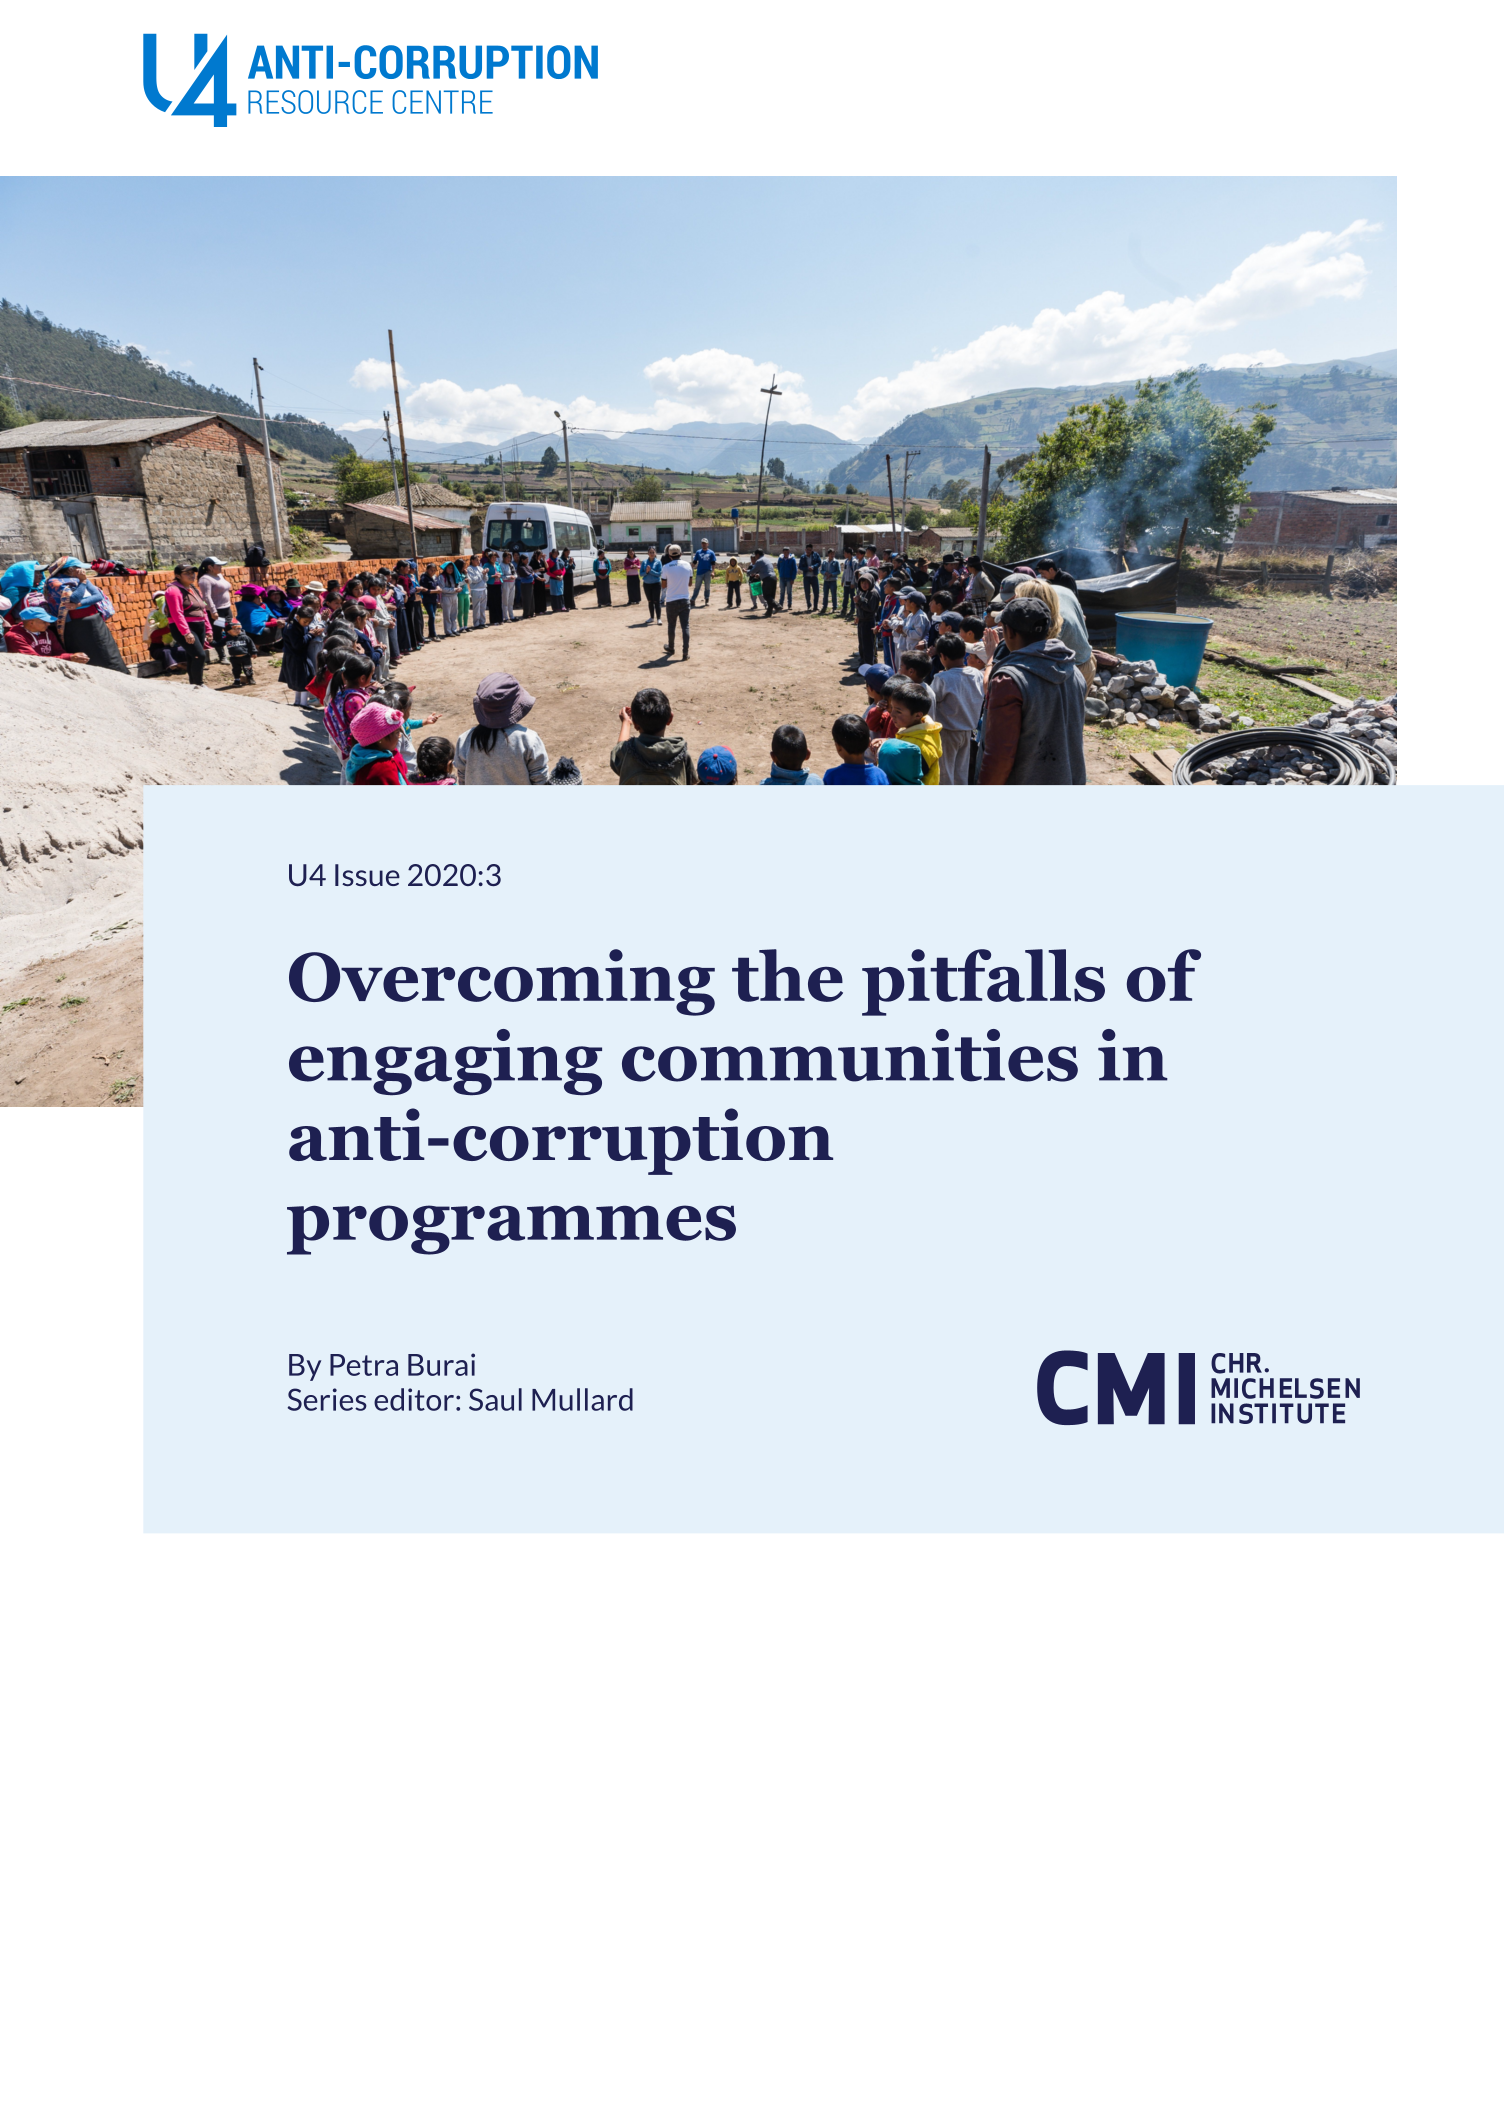 Overcoming the pitfalls of engaging communities in anti-corruption programmes